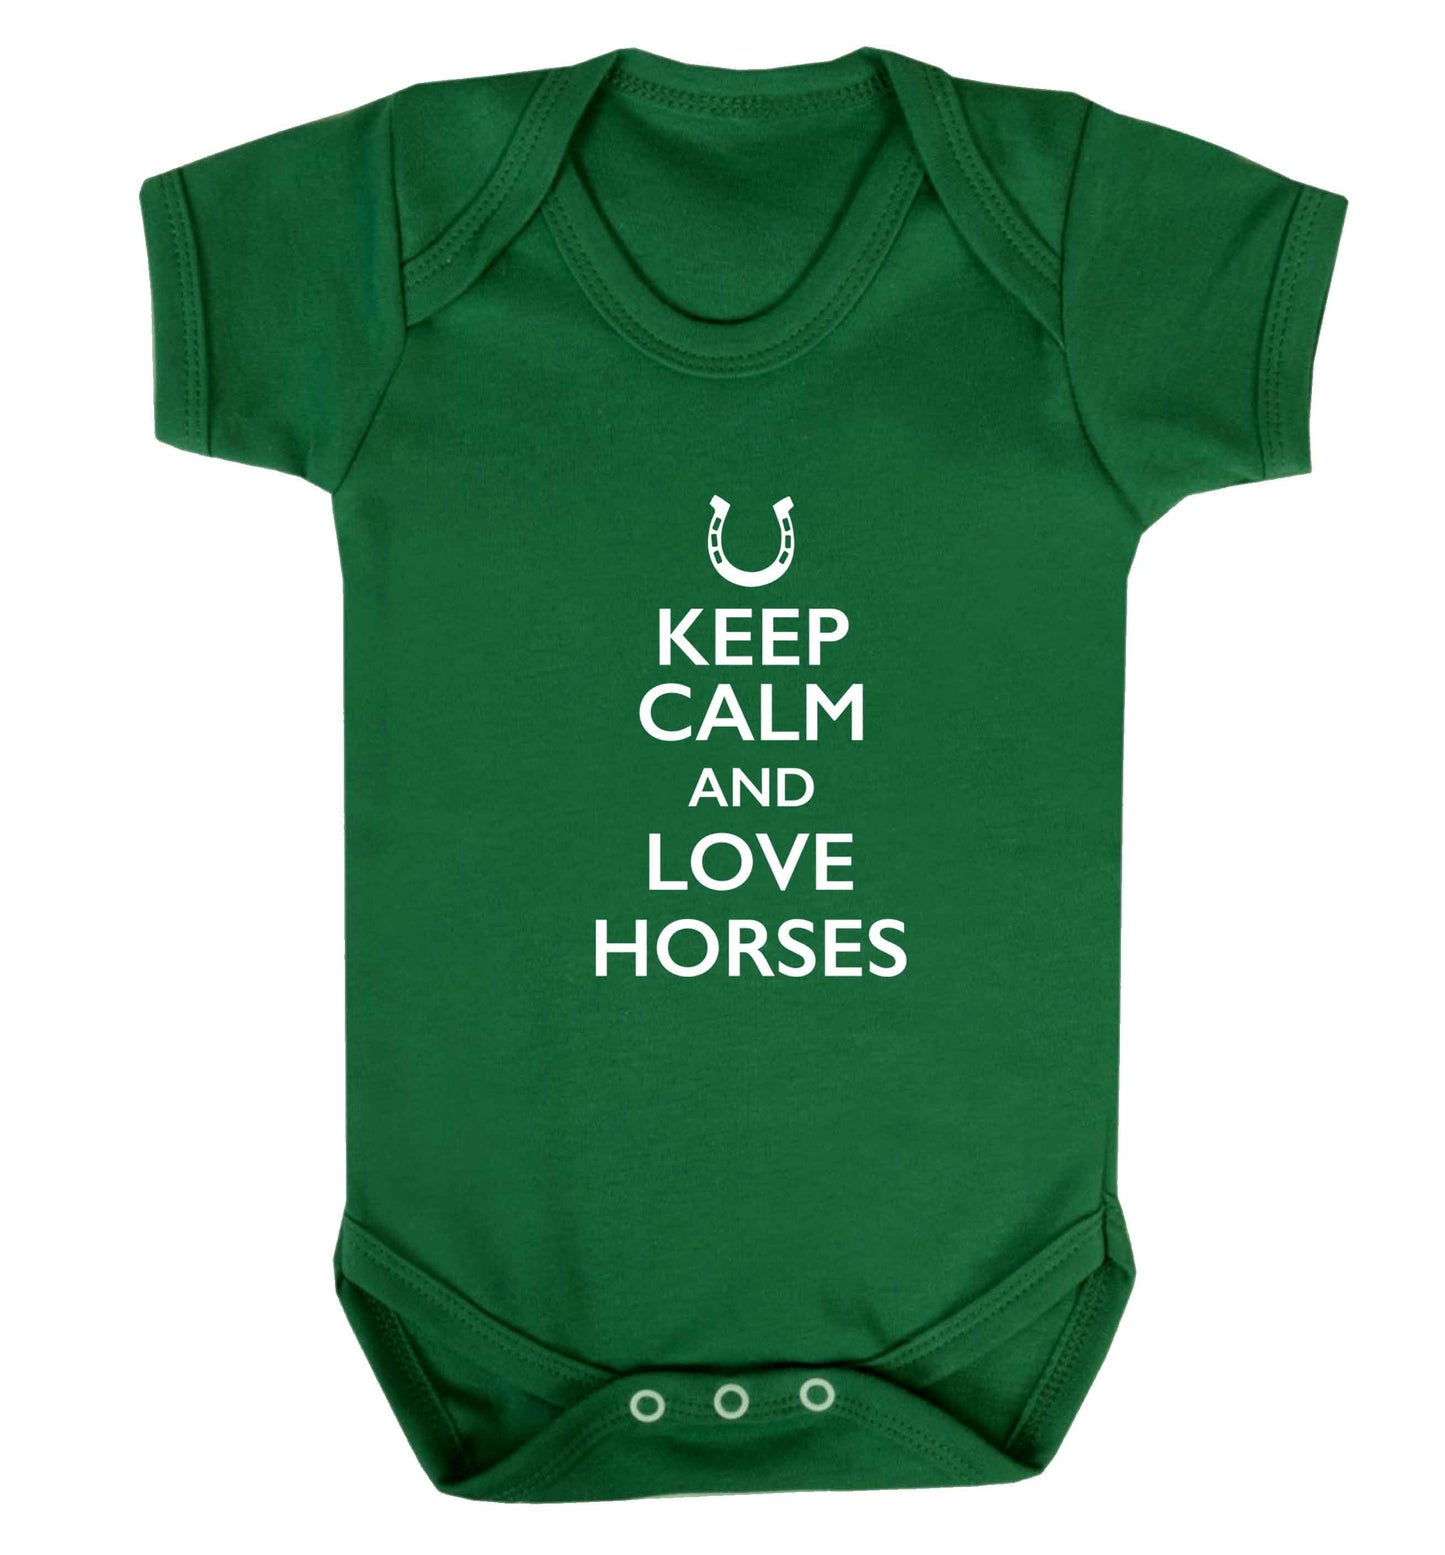 Keep calm and love horses baby vest green 18-24 months